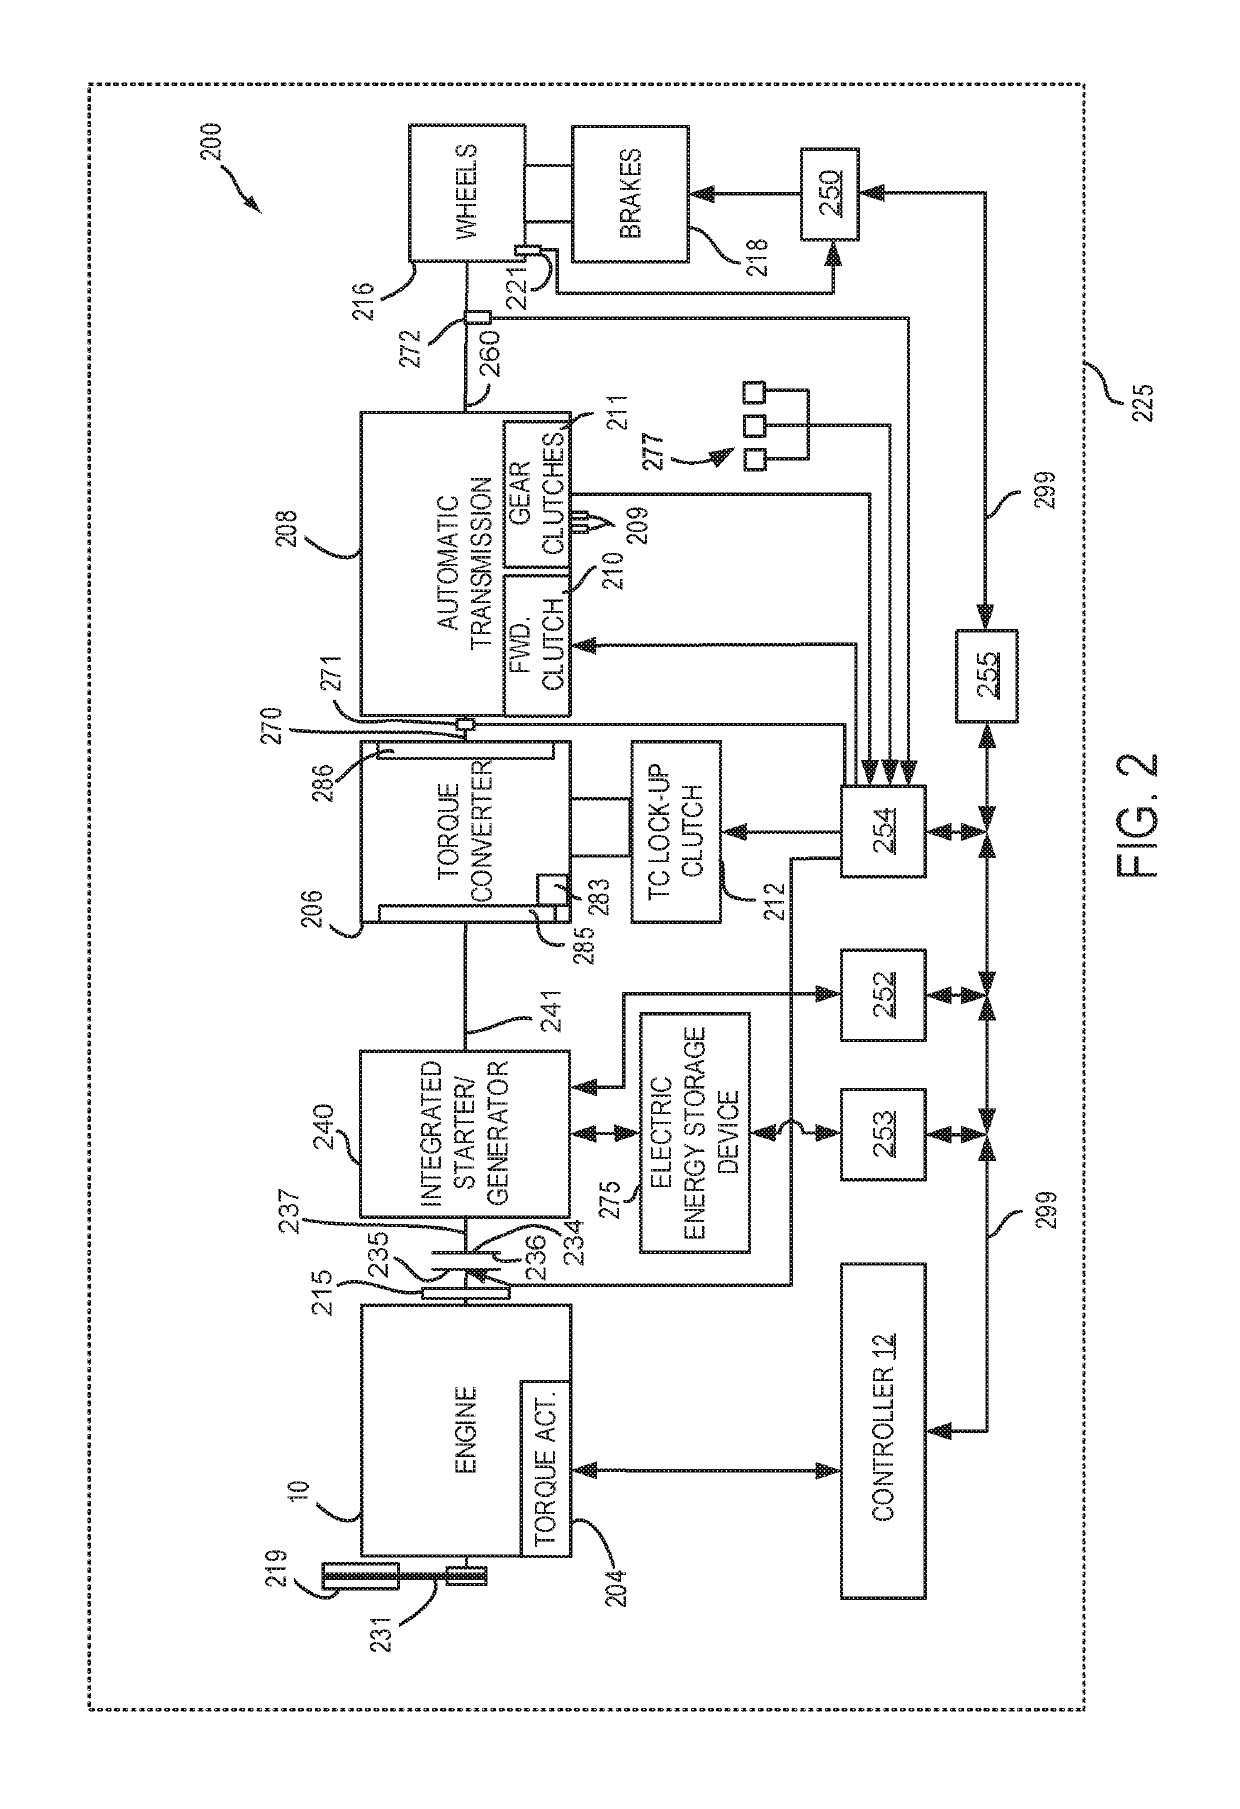 Methods and system for operating an engine